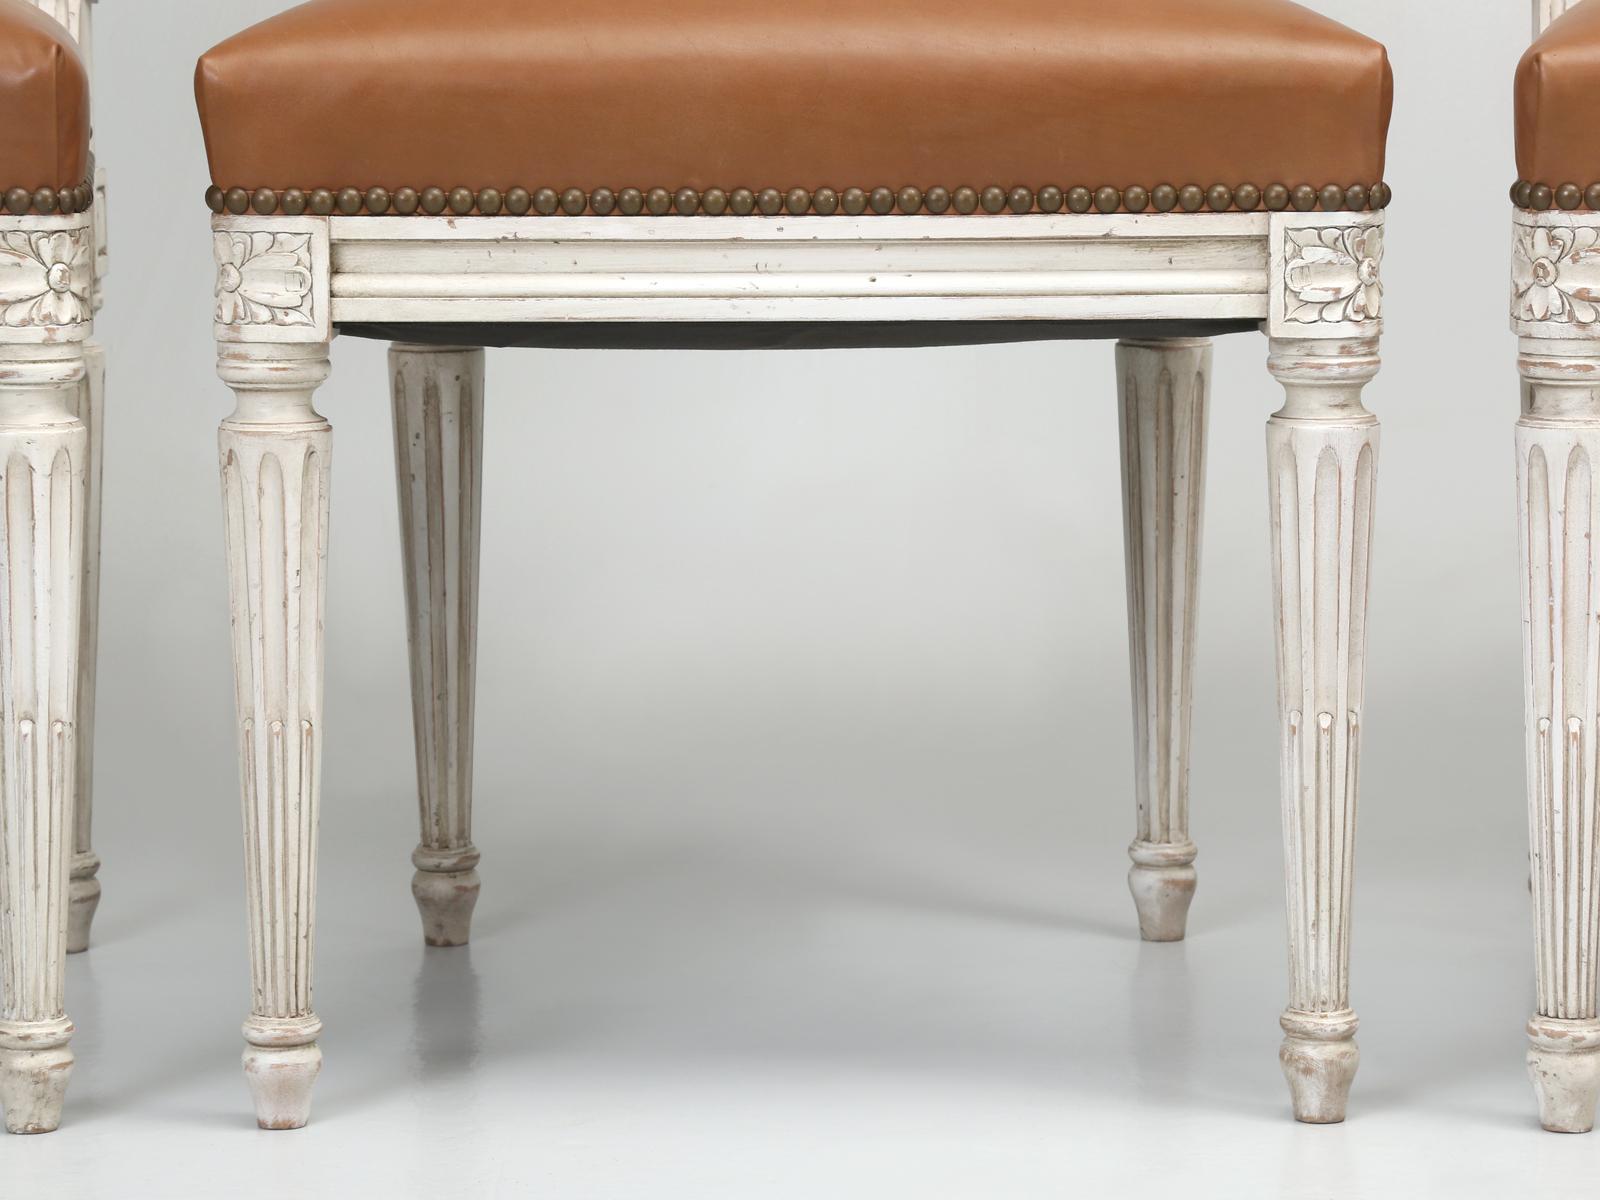 Contemporary French Louis XVI Style Dining Chairs Handmade in France to Our Specifications